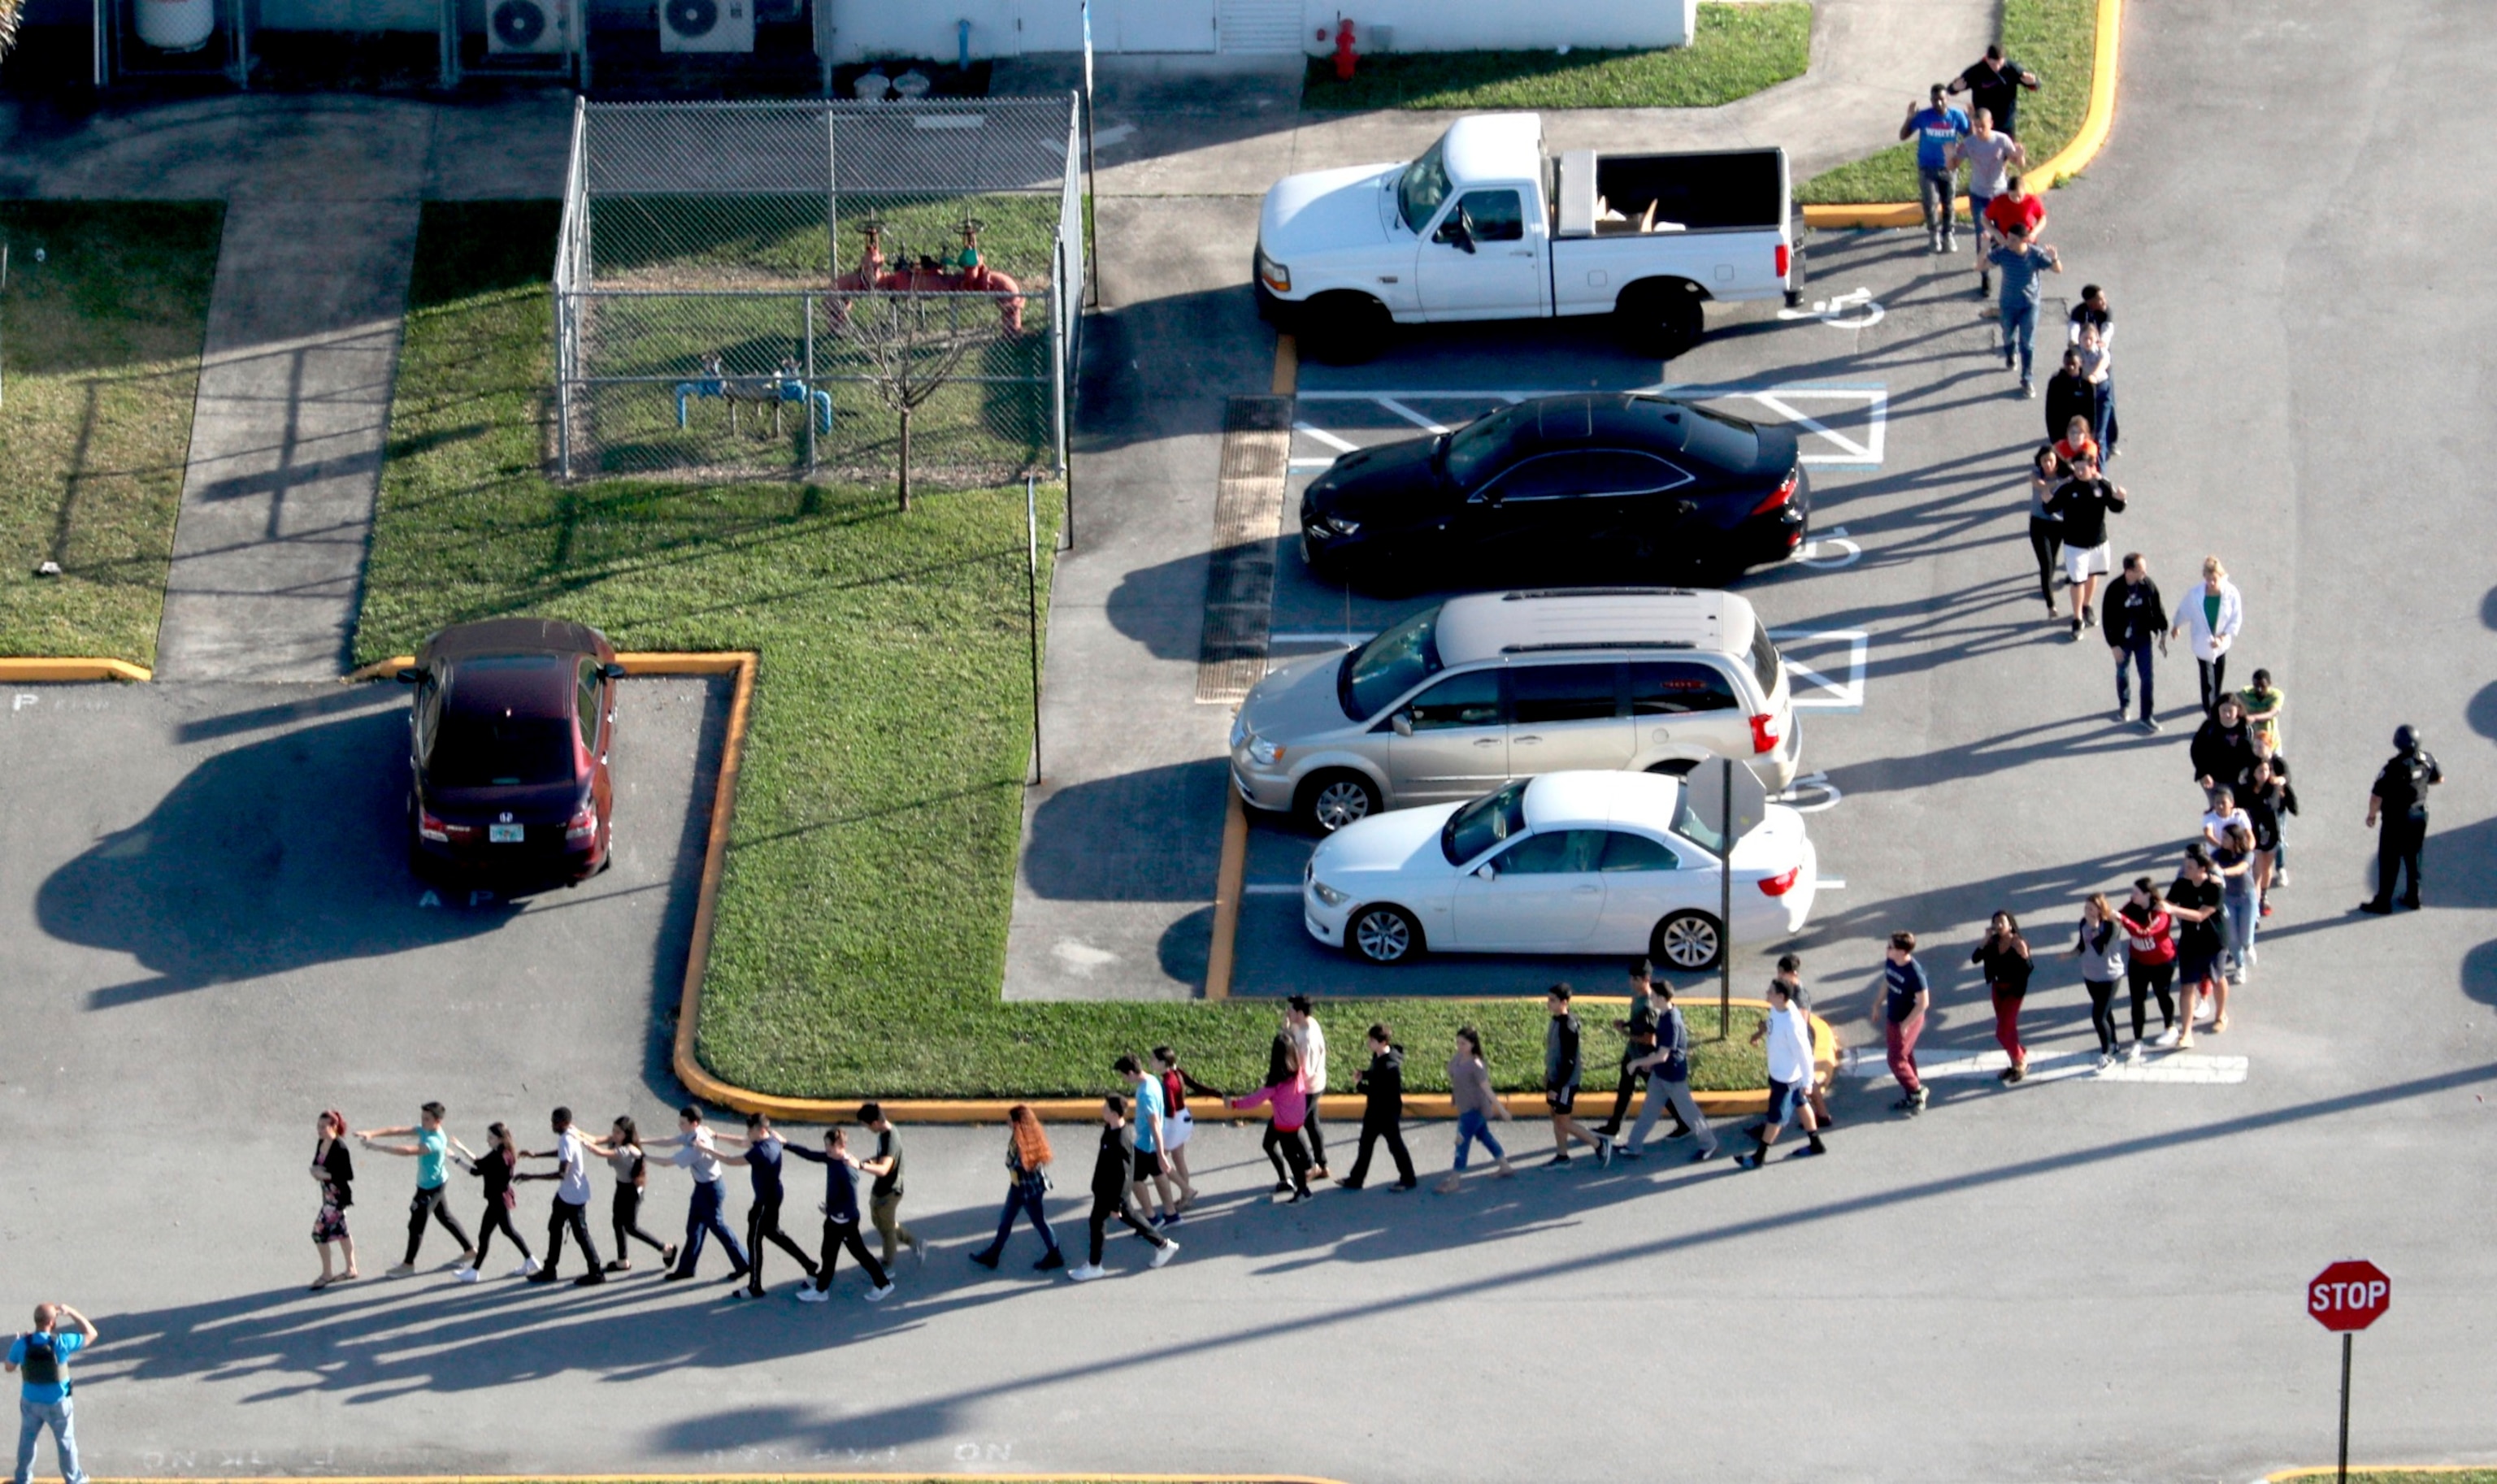 PHOTO: Students are evacuated by police from Marjory Stoneman Douglas High School in Parkland, Fla., Feb. 14, 2018, after a shooter opened fire on the campus.